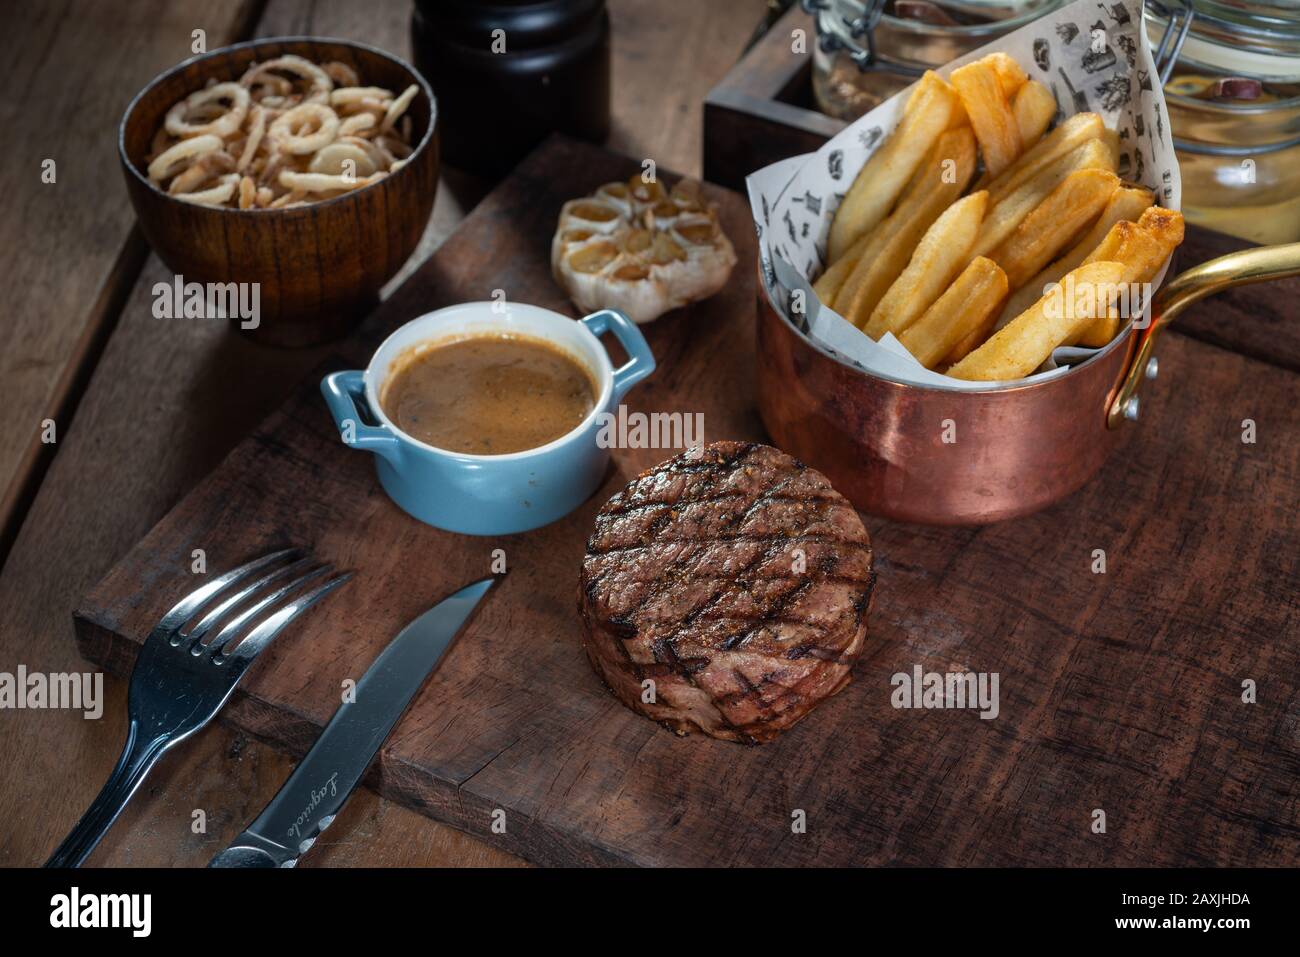 Fillet Mignon Steak with rustic set up Stock Photo